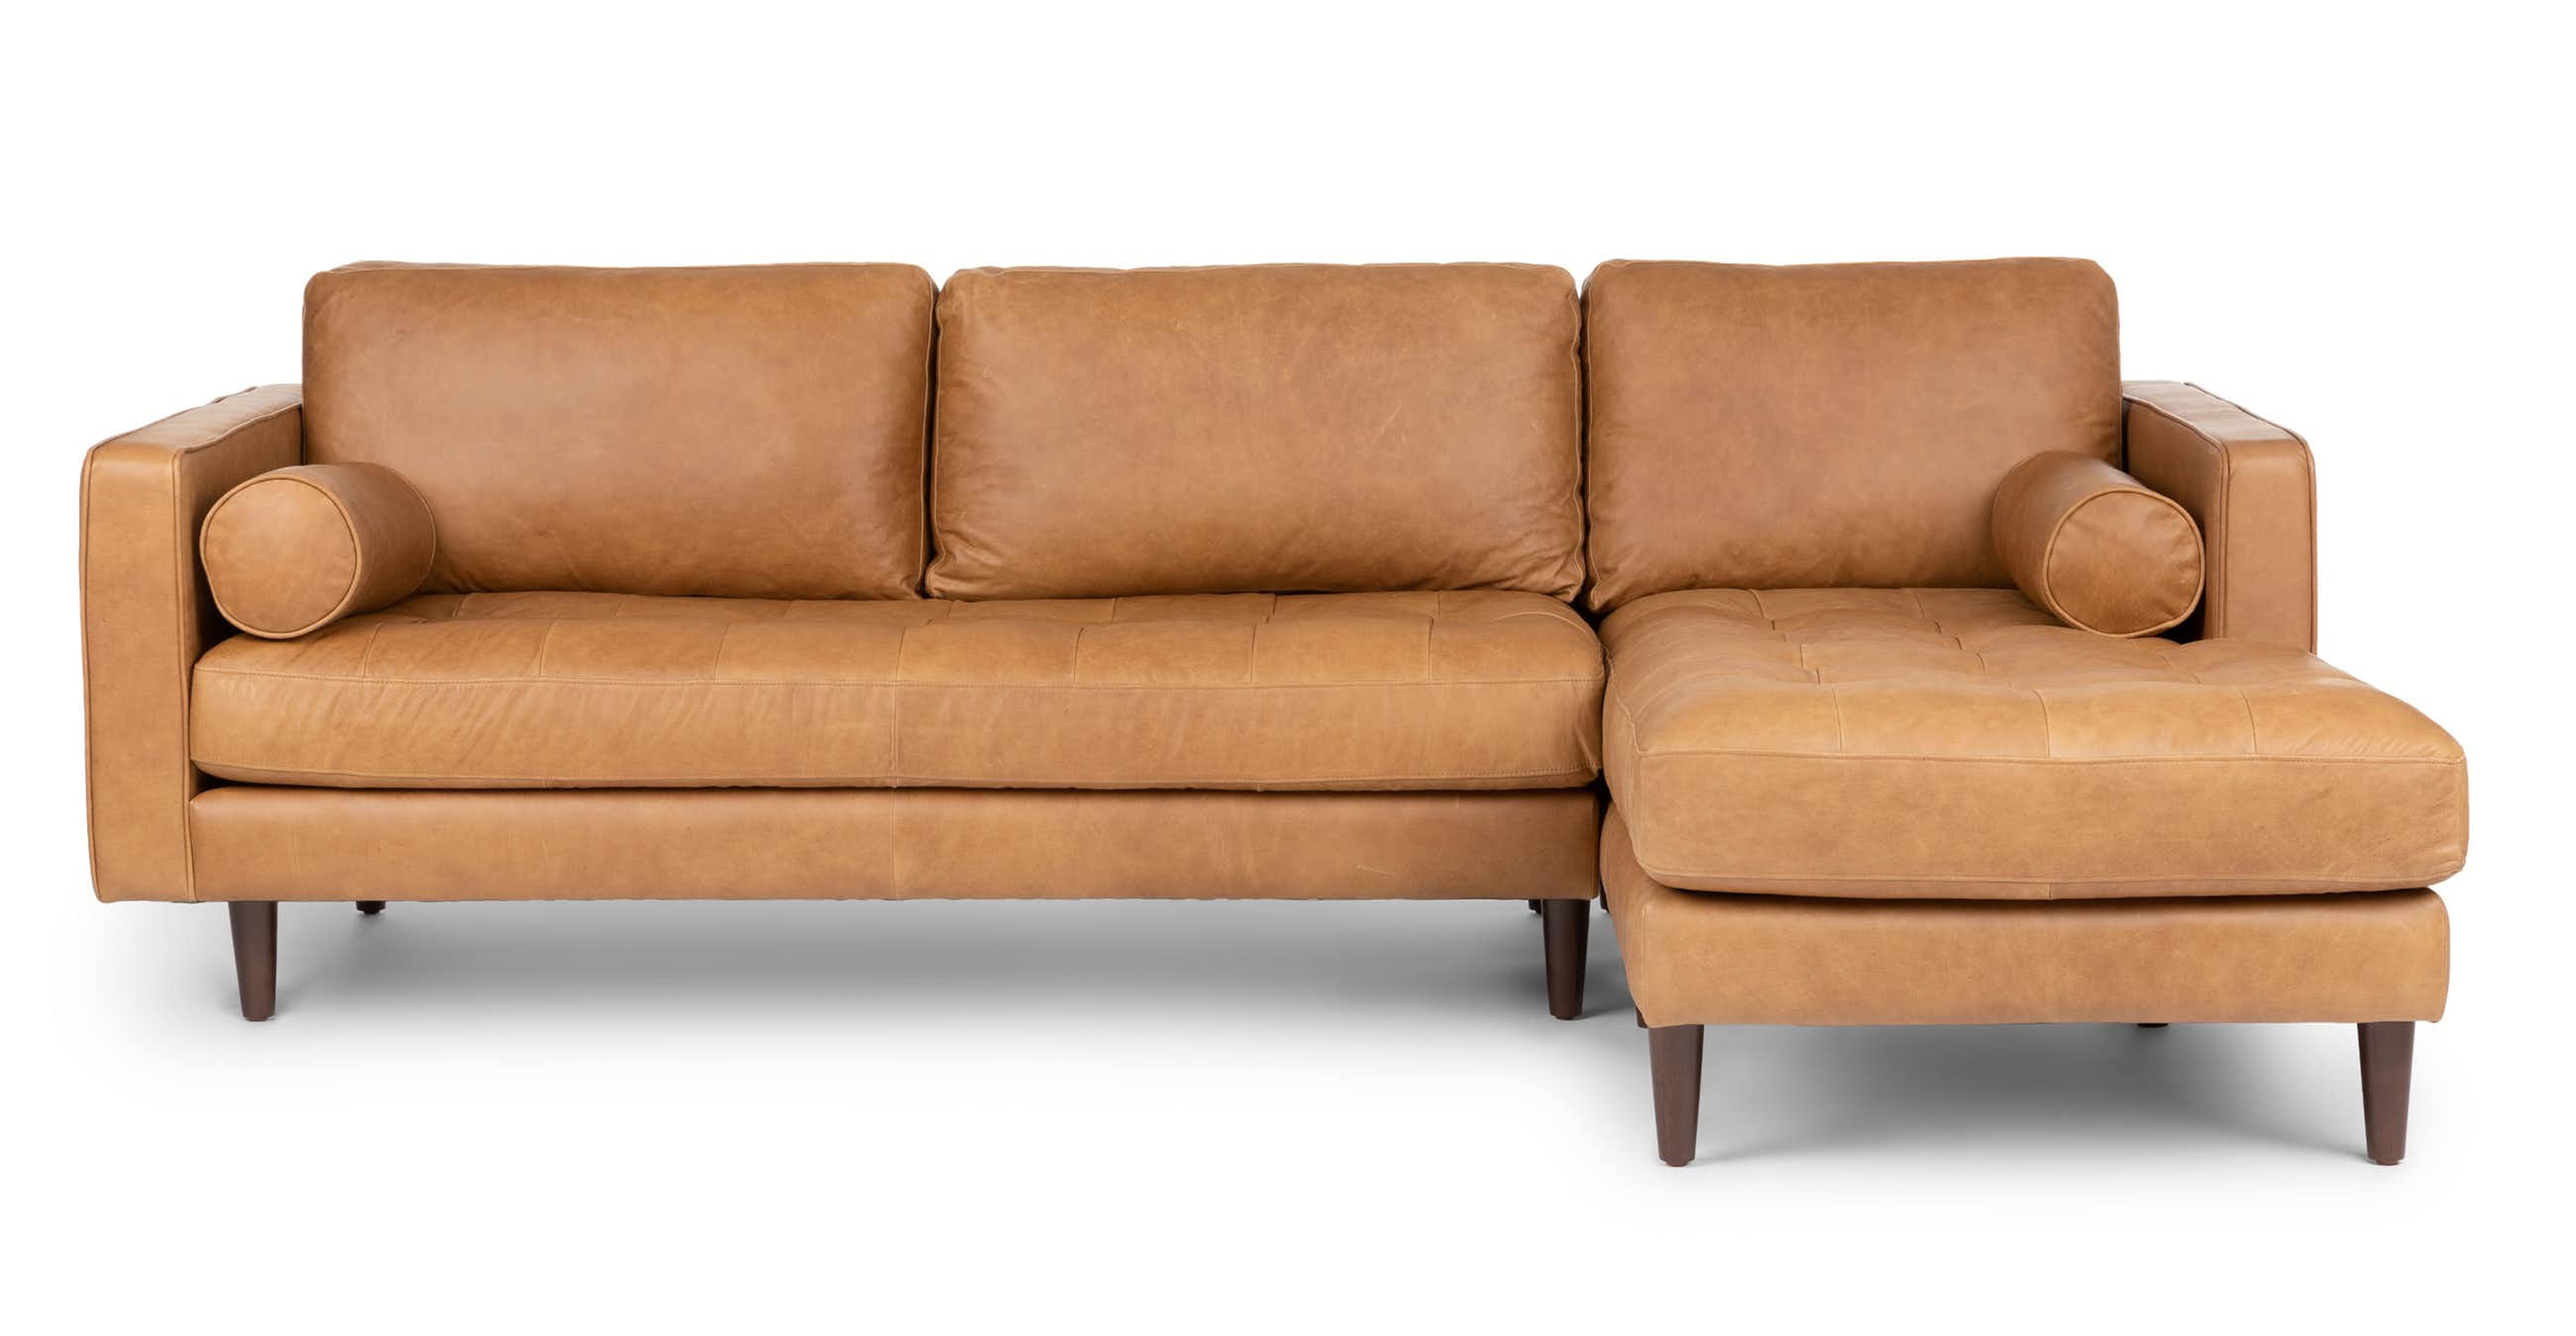 Sven Charme Tan Right Sectional Sofa - Article